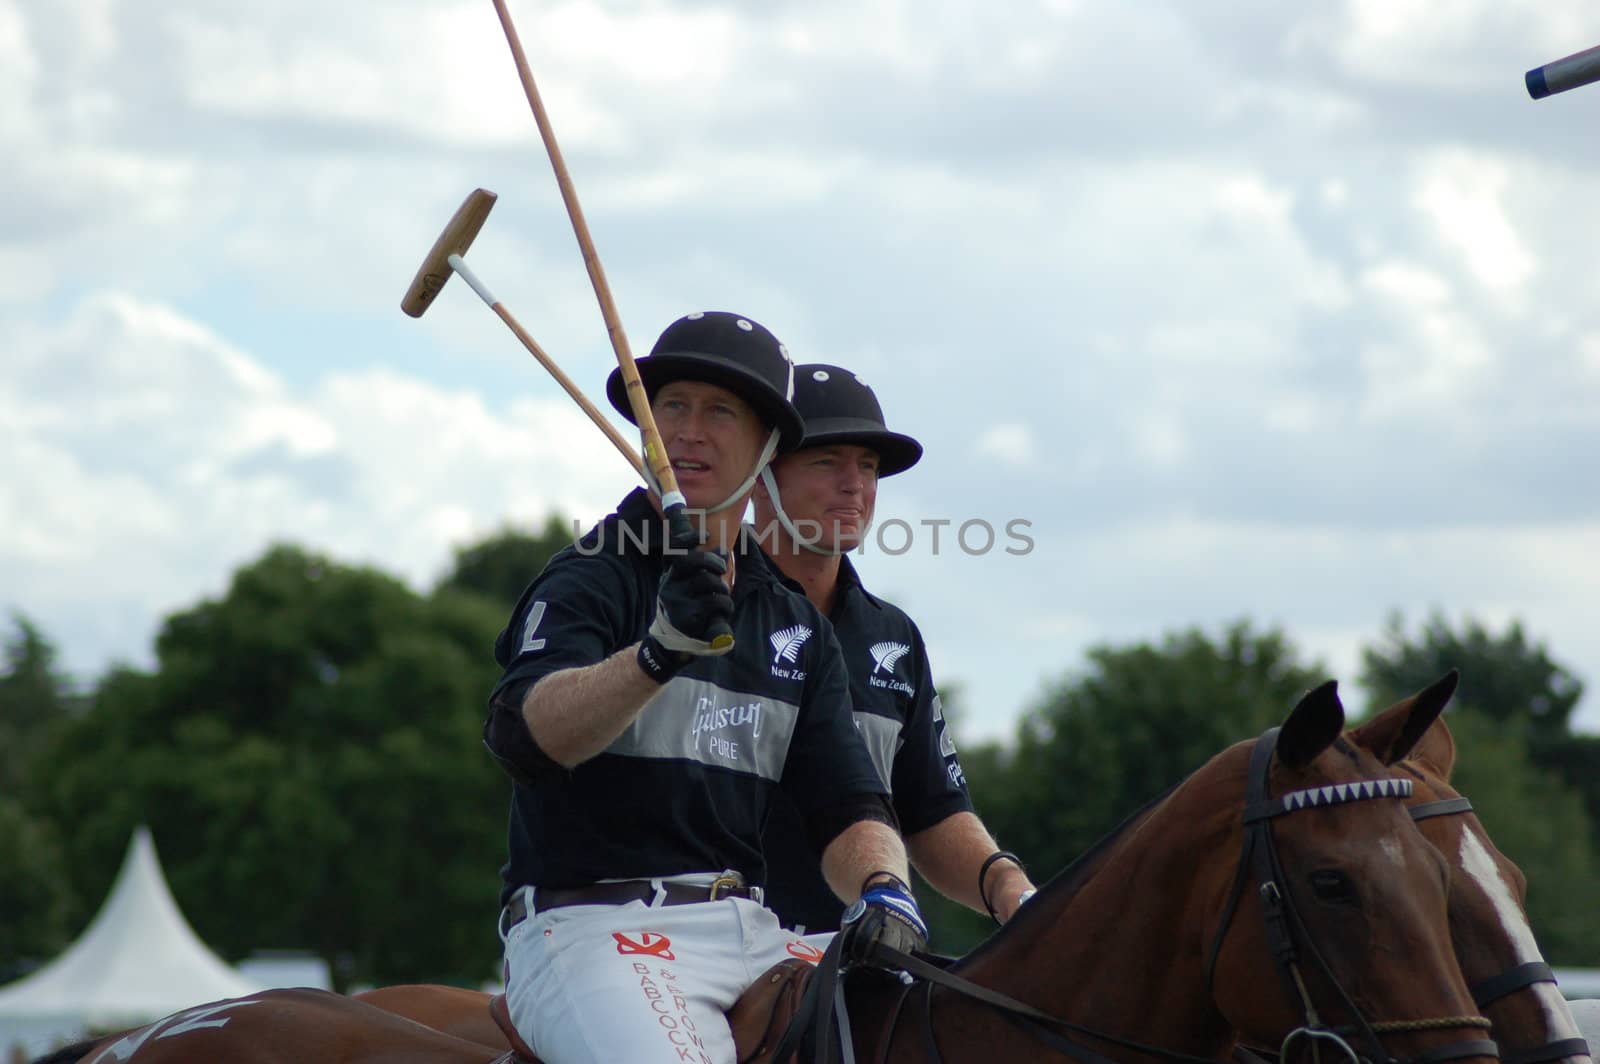 HRH Prince Charles mounted and playing polo  at the Cartier Polo, Windsor.